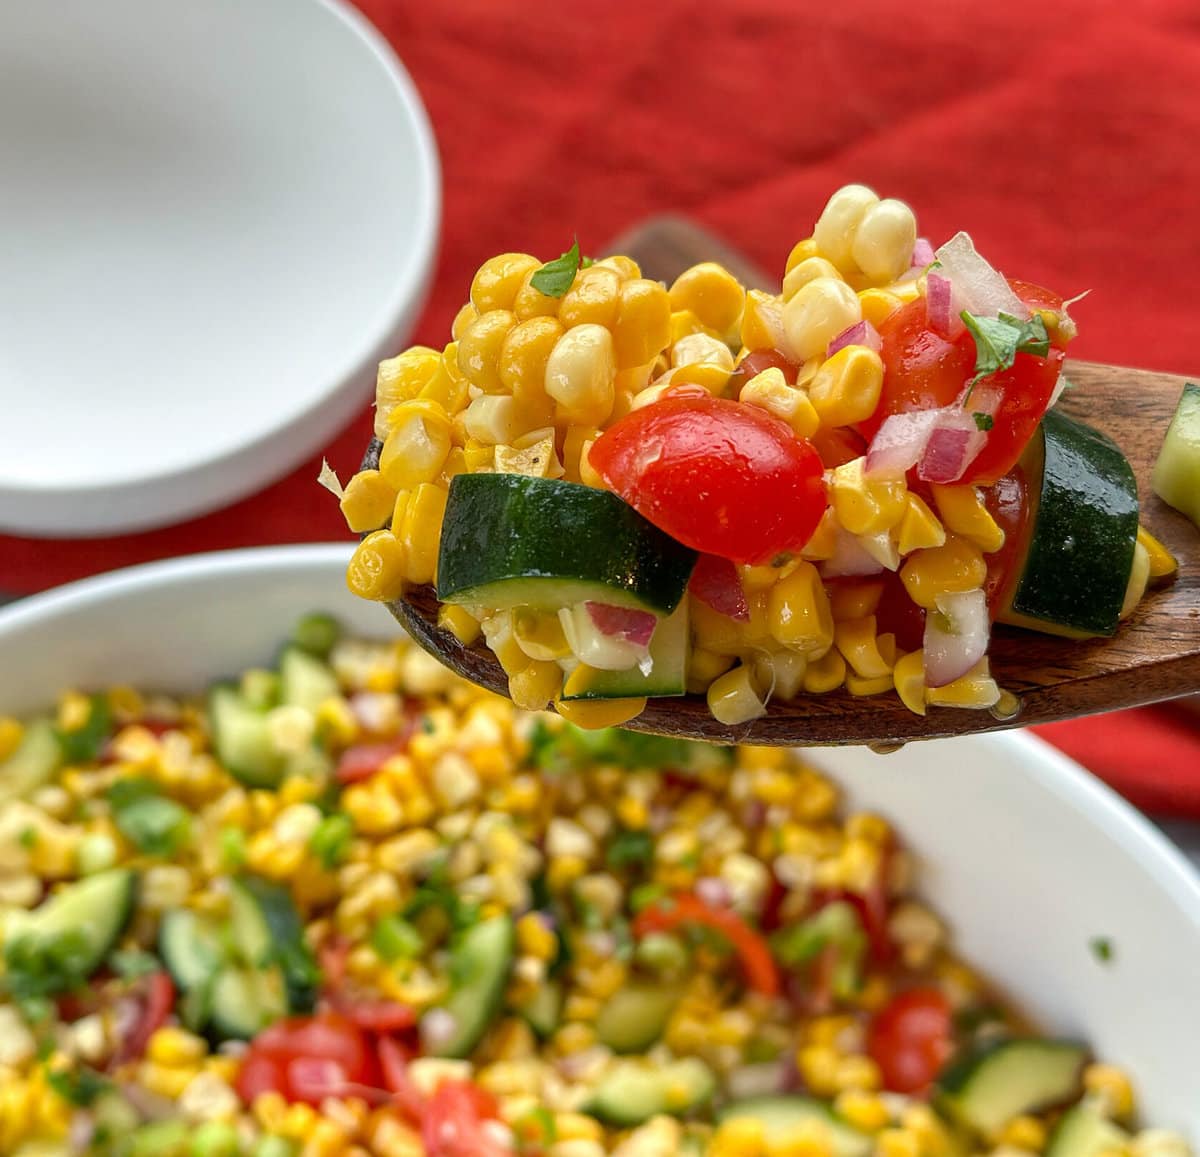 A wooden spoon holding a scoop of sweetcorn salad with tomato, cucumber and red onion